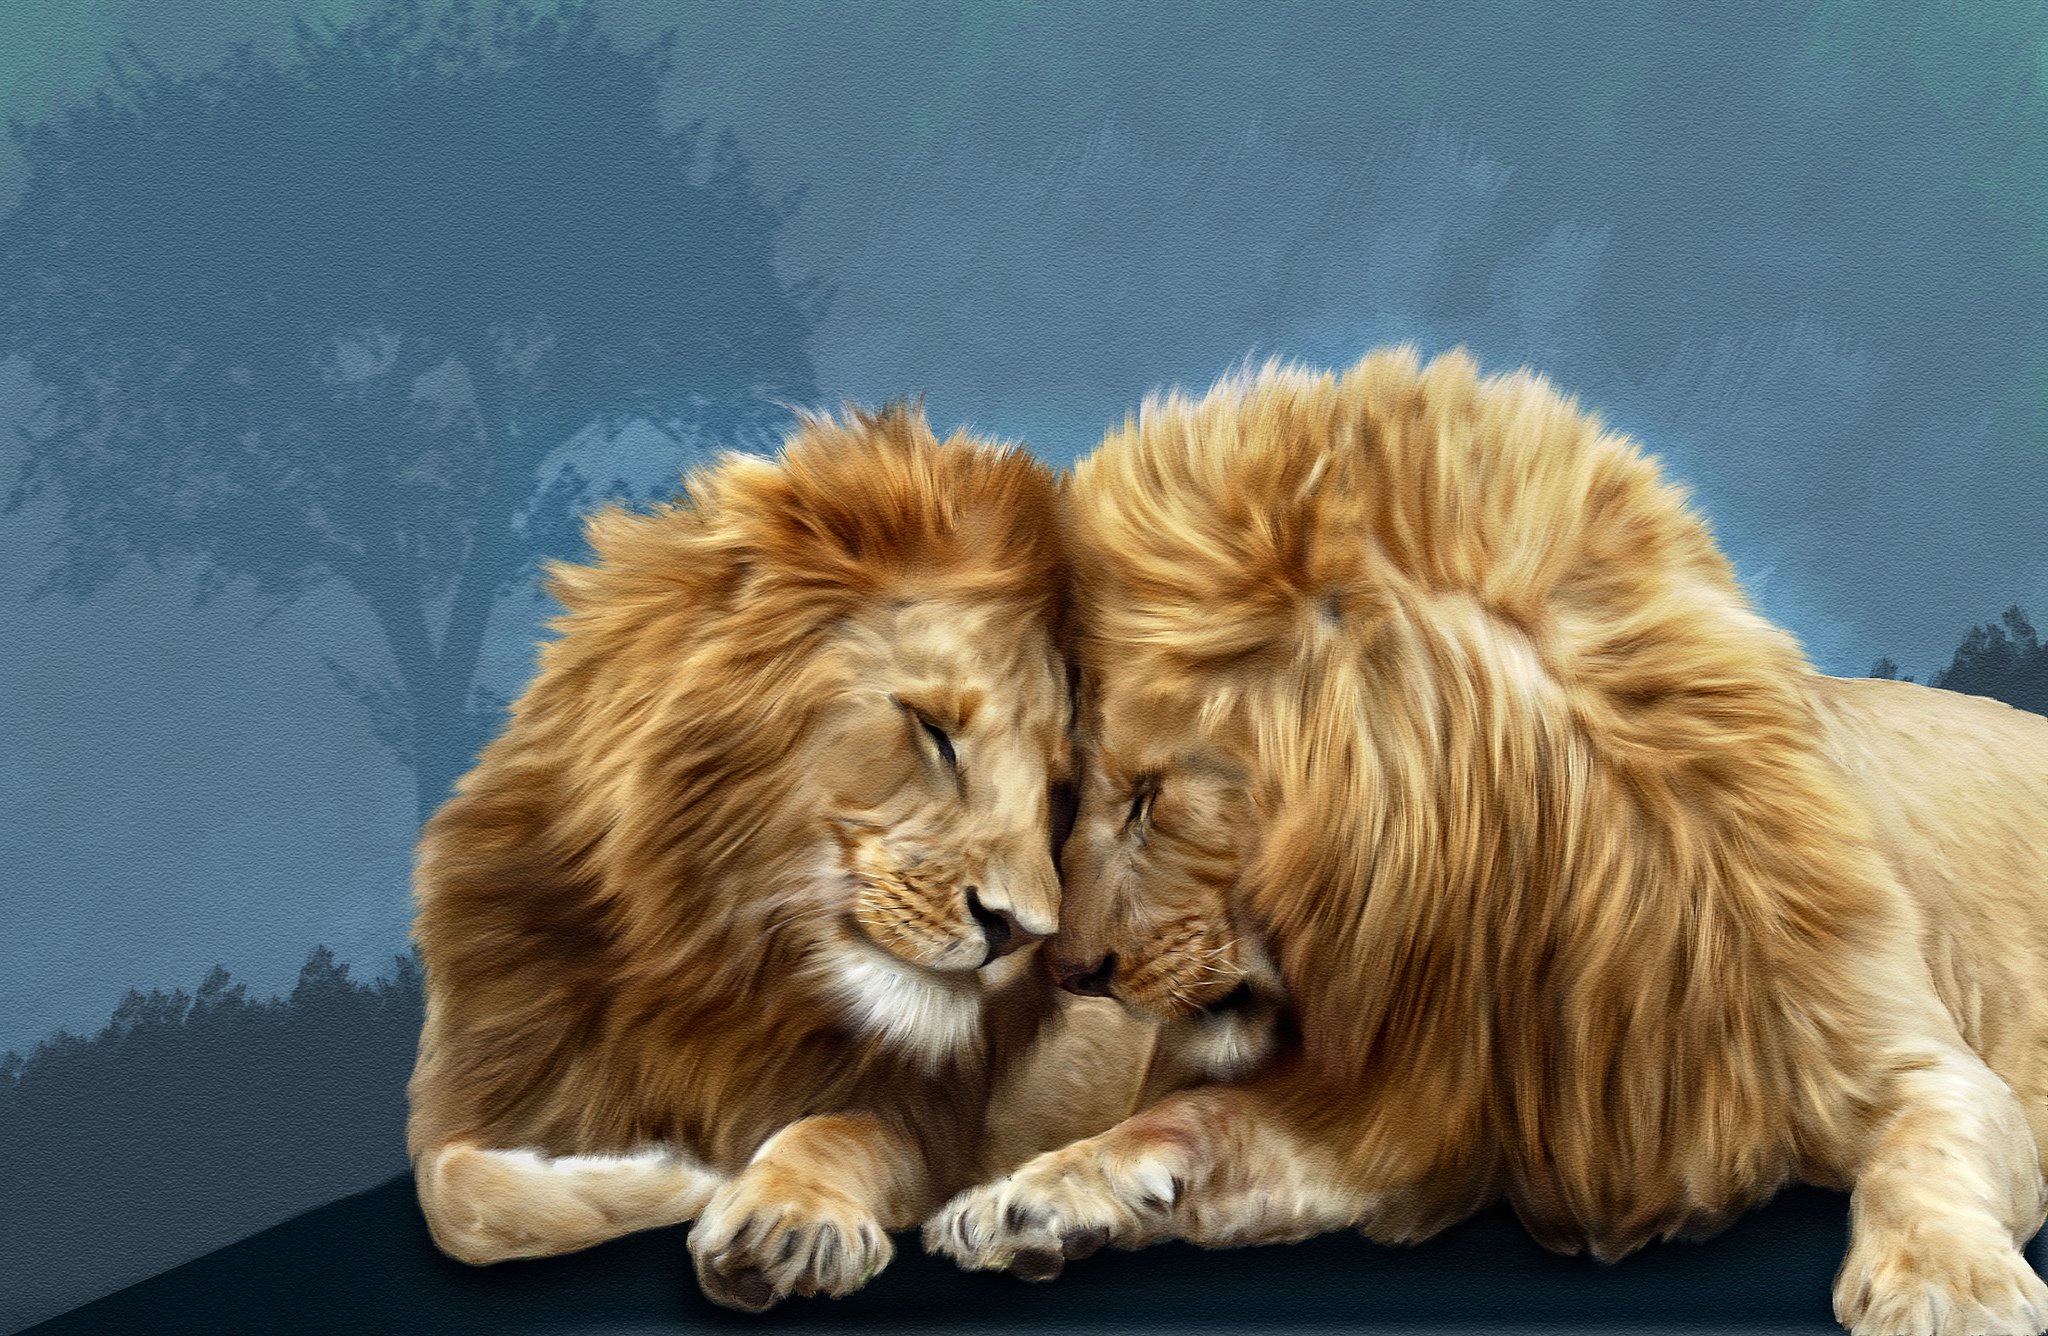 big, Cats, Lions, Two, Animals, Lion Wallpaper HD / Desktop and Mobile Background